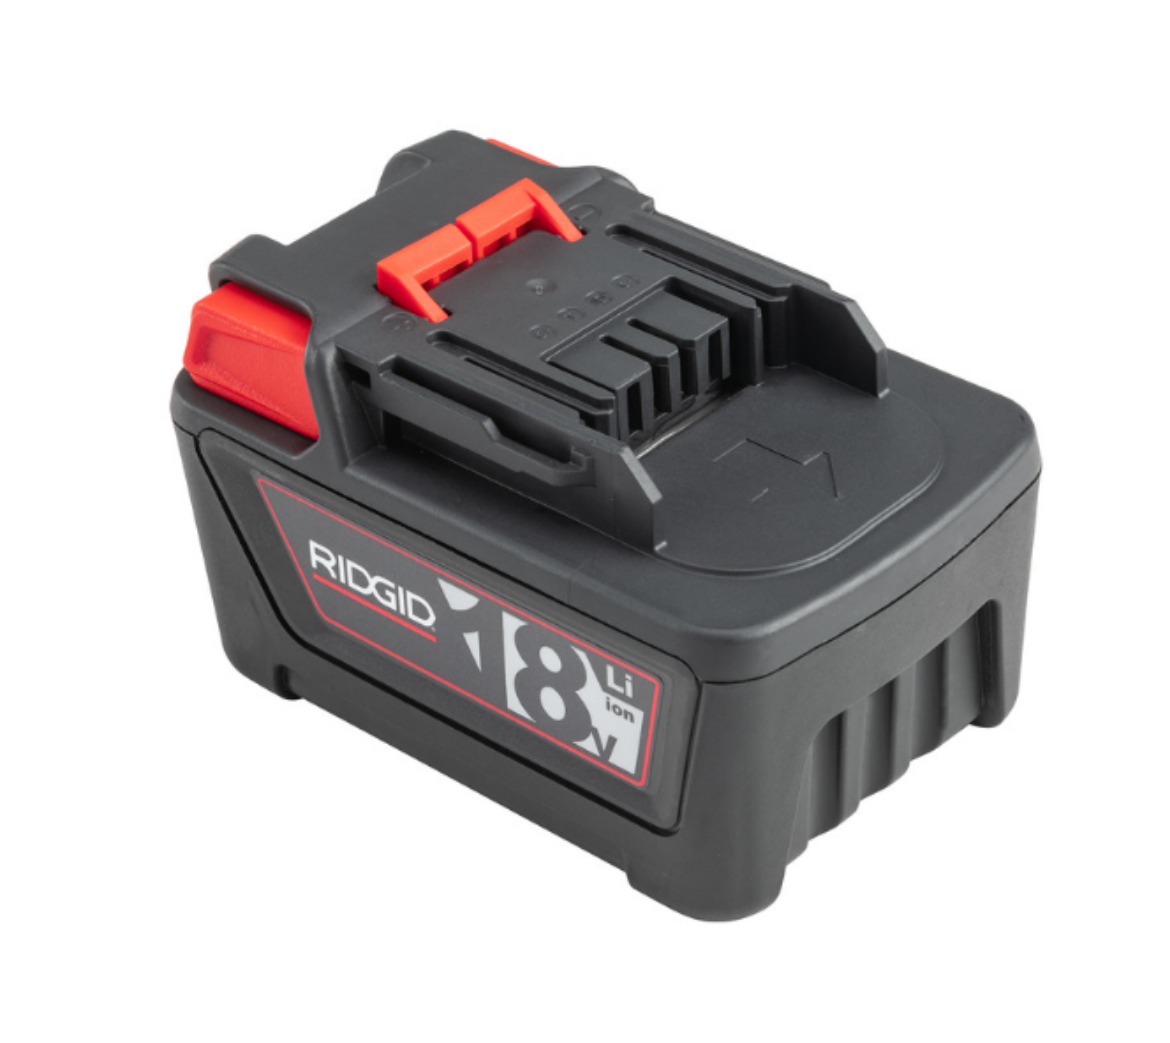 Picture of RIDGID 18V 5.0AH Advance Lithium Battery